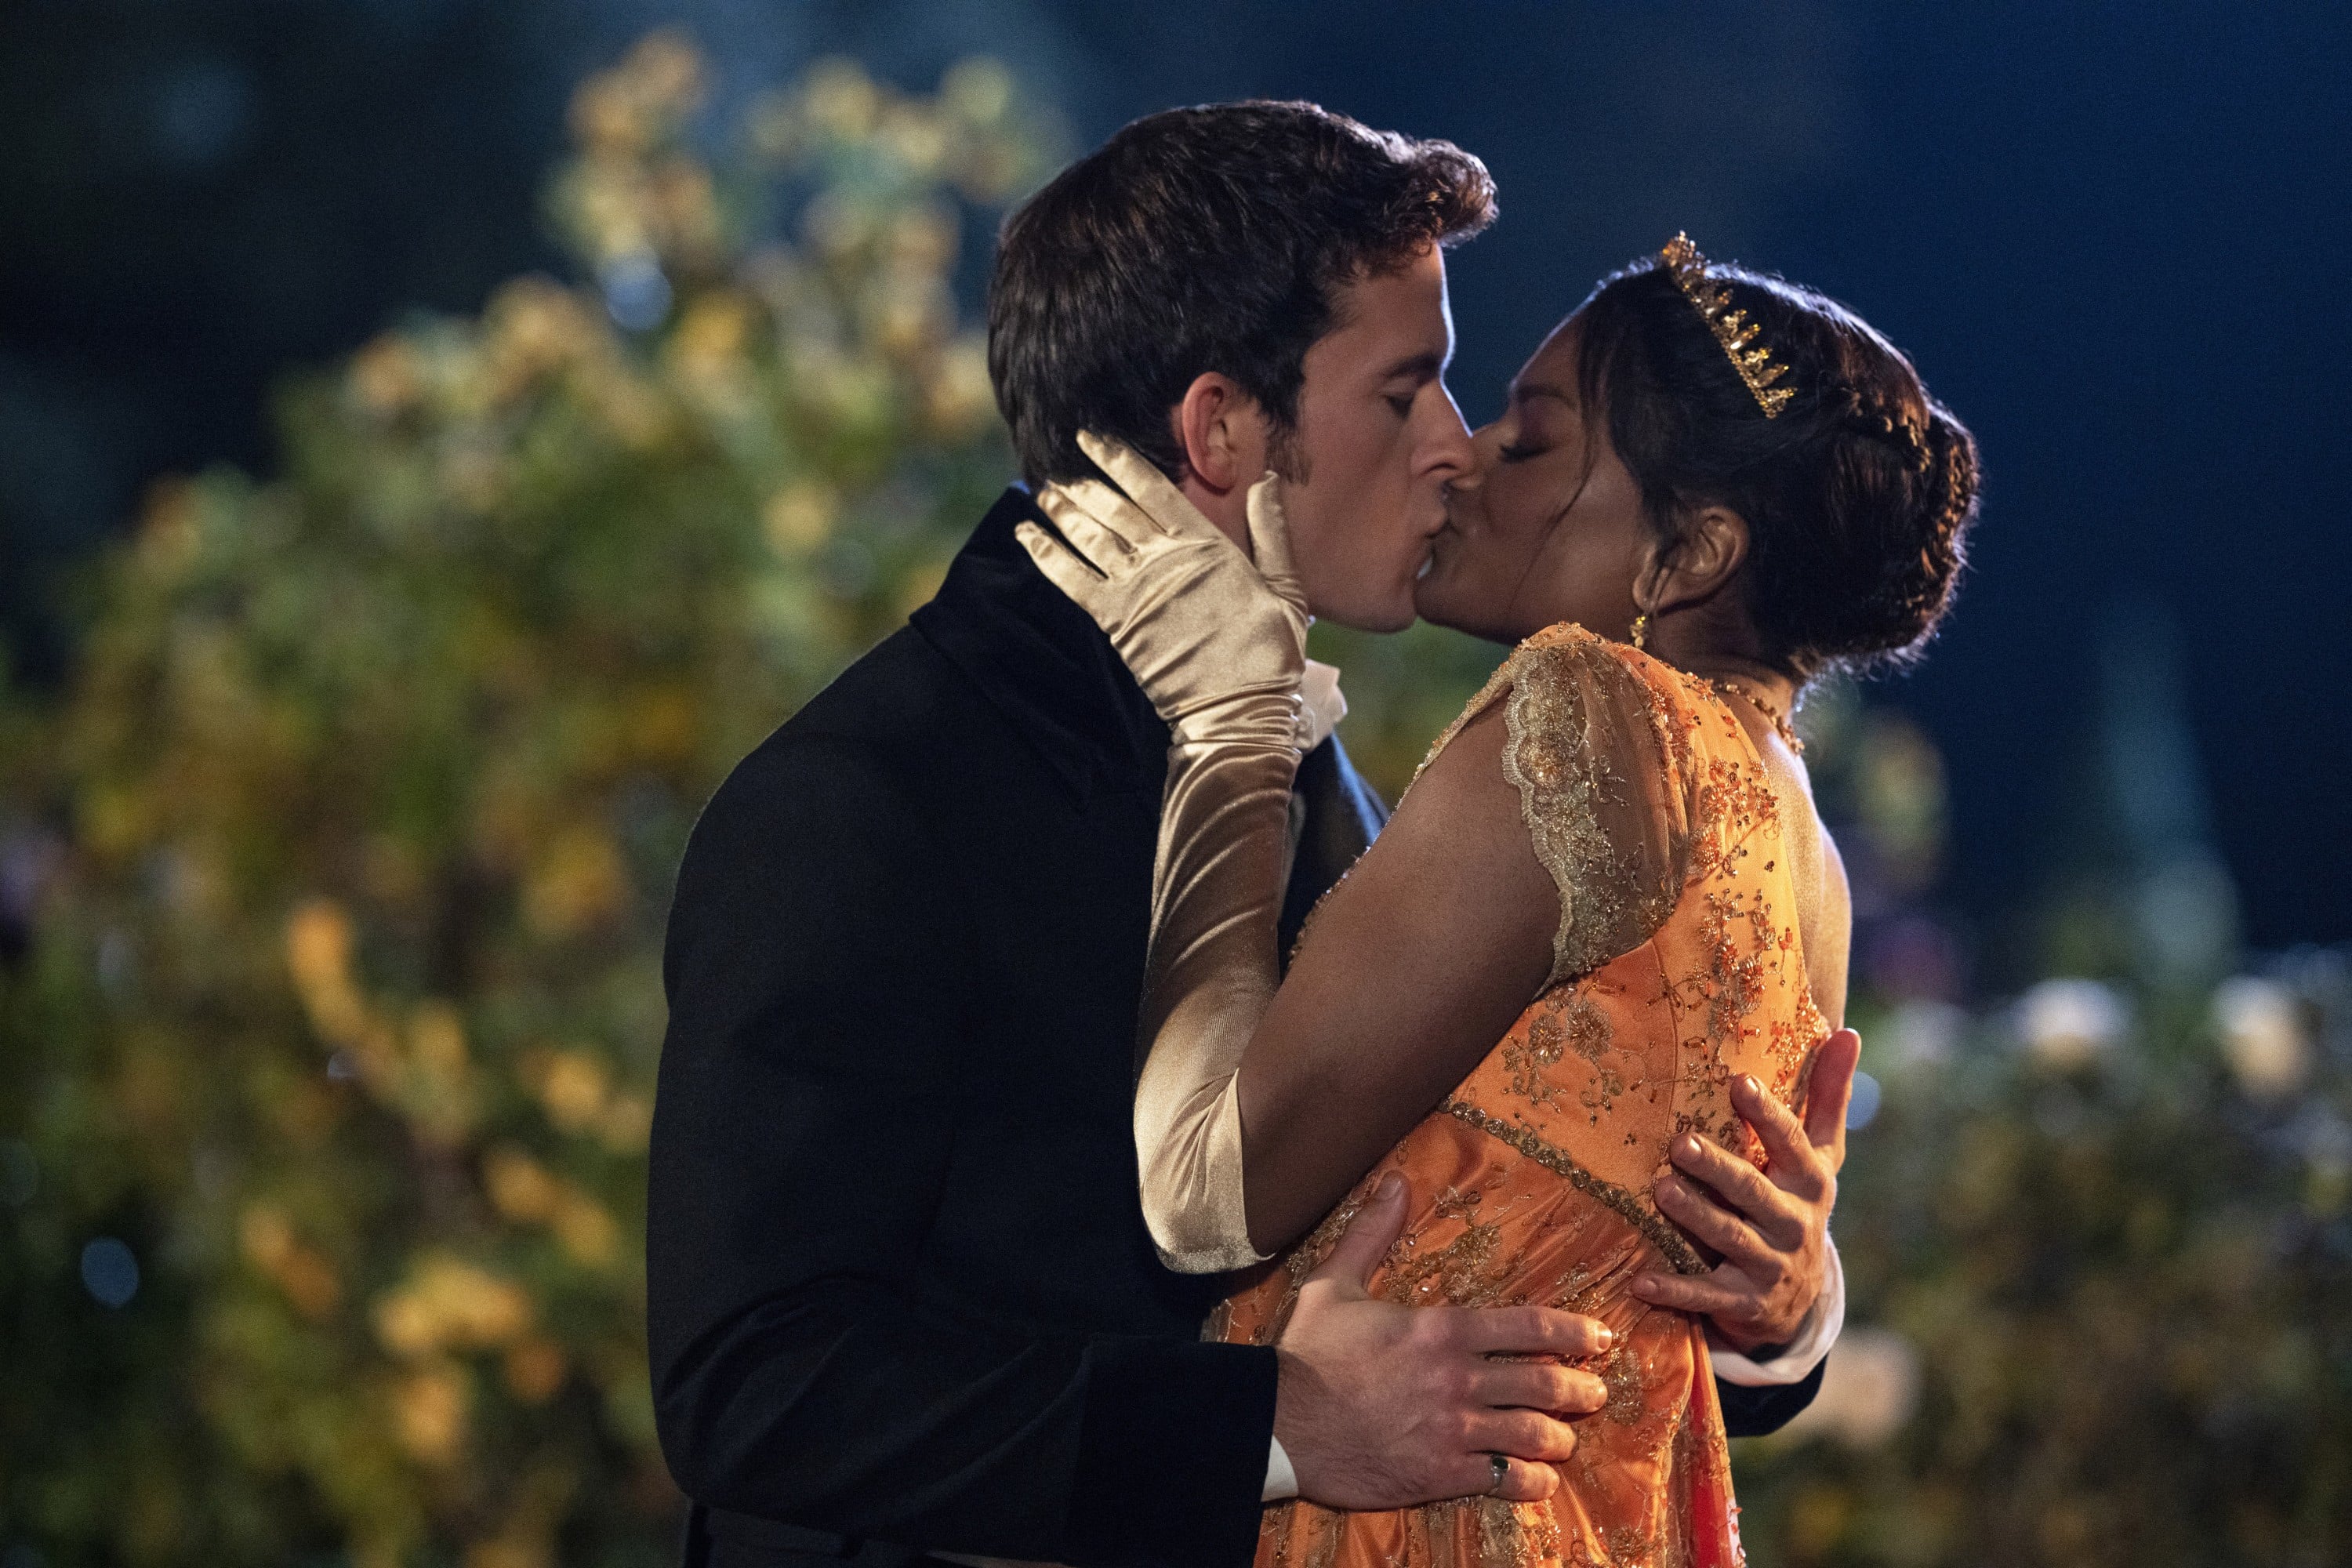 The Sexiest Kiss Scenes in Movies and TV Shows of 2022 | POPSUGAR